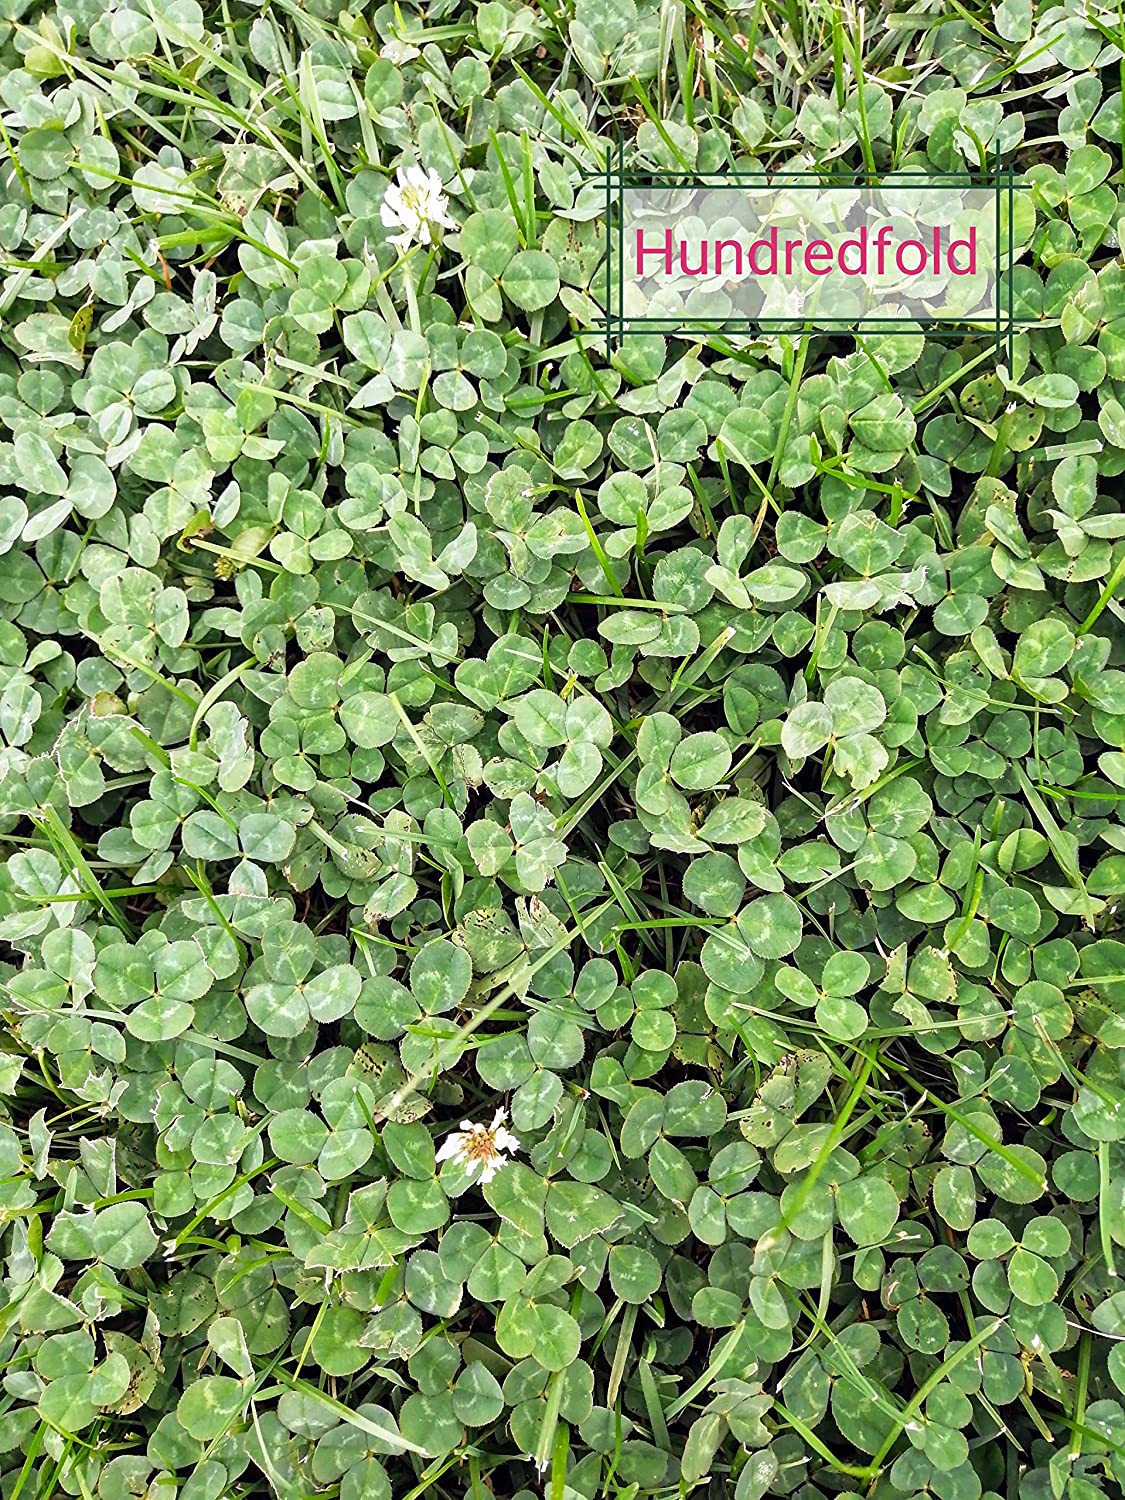 Hundredfold White Dutch Clover Trifolium repens 2 lbs Seeds - Perennial Legume Non-GMO Cover Crop, Ground Cover & Bee Plant for Lawn, Garden & Cropland, Shipped in Canada